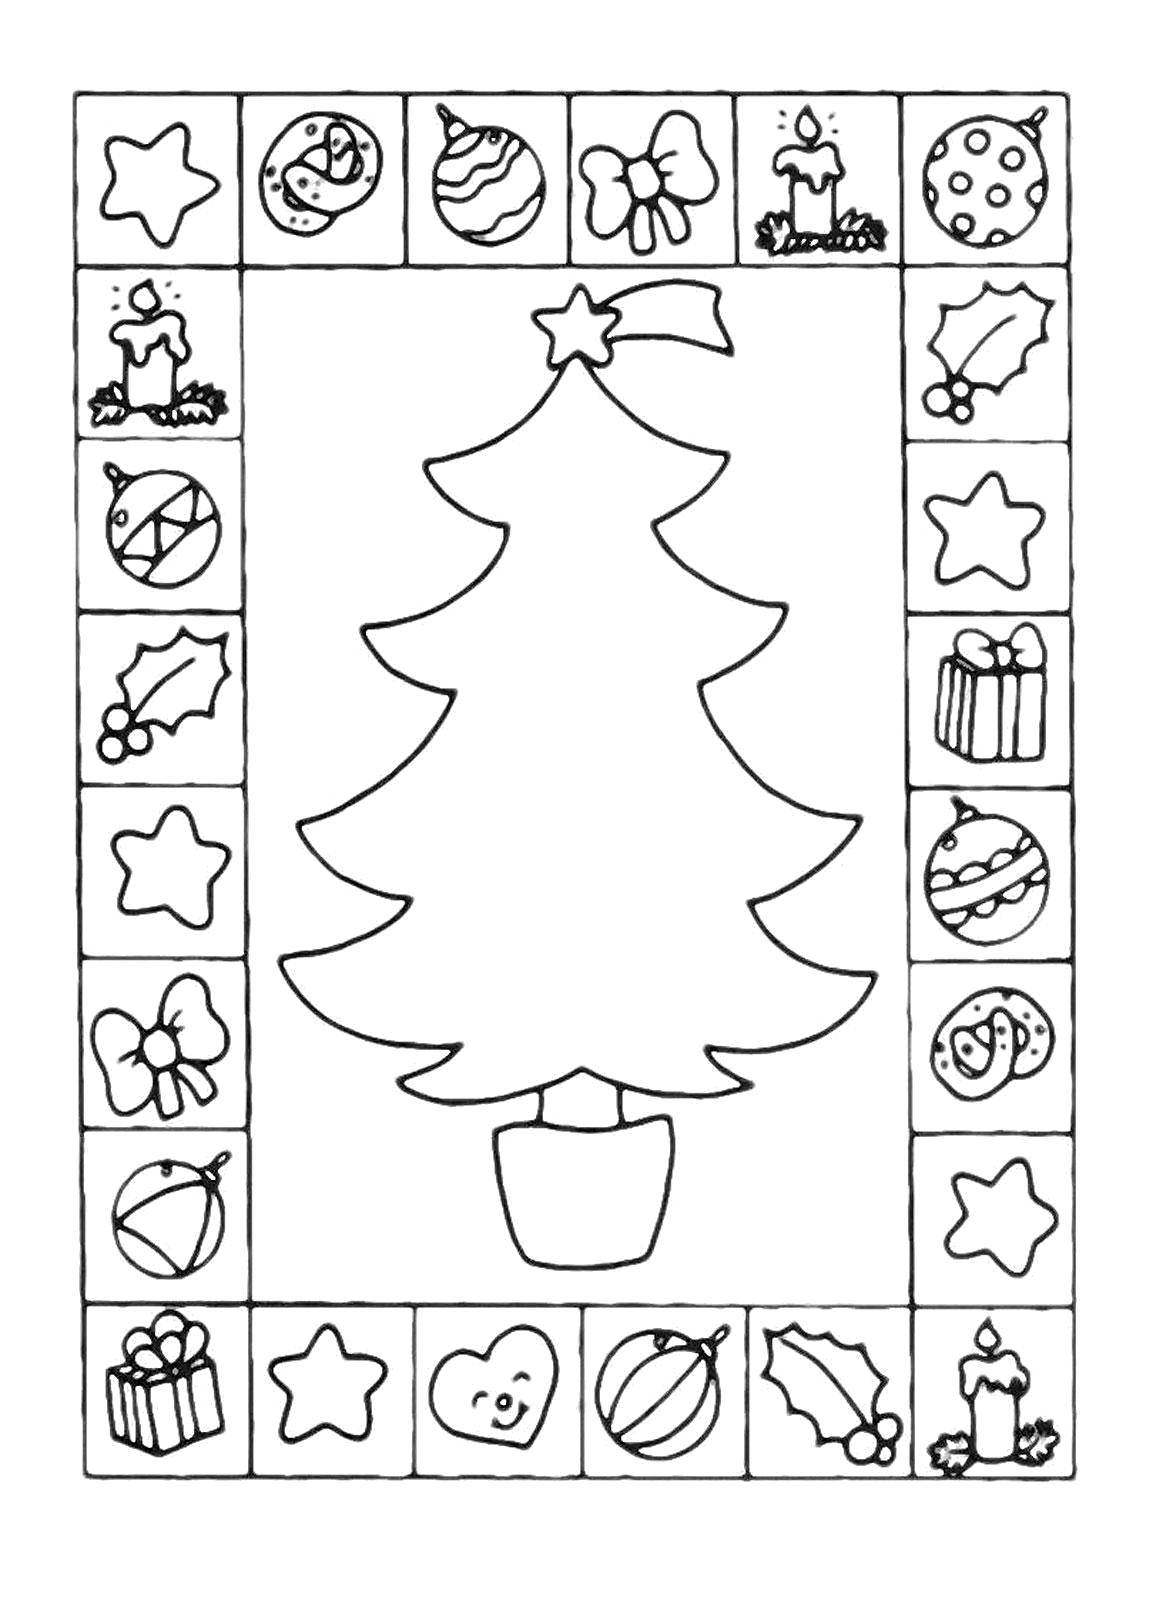 Coloring Decorate the Christmas tree. Category coloring Christmas tree. Tags:  New Year, tree, gifts, toys.